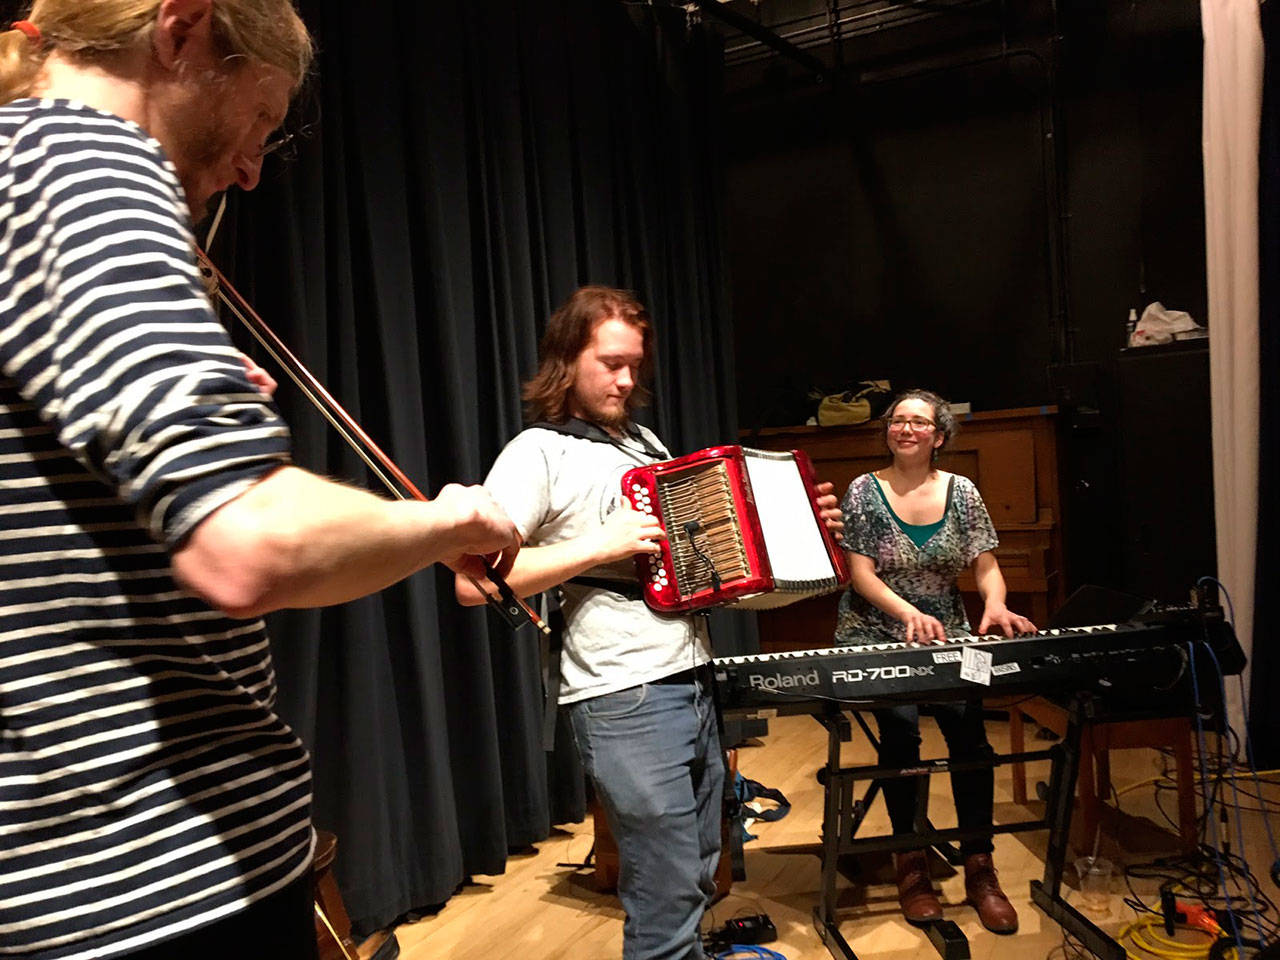 The Waxwings band will bring the rhythm to the Black Diamond Community Hall contra dance this Saturday night.